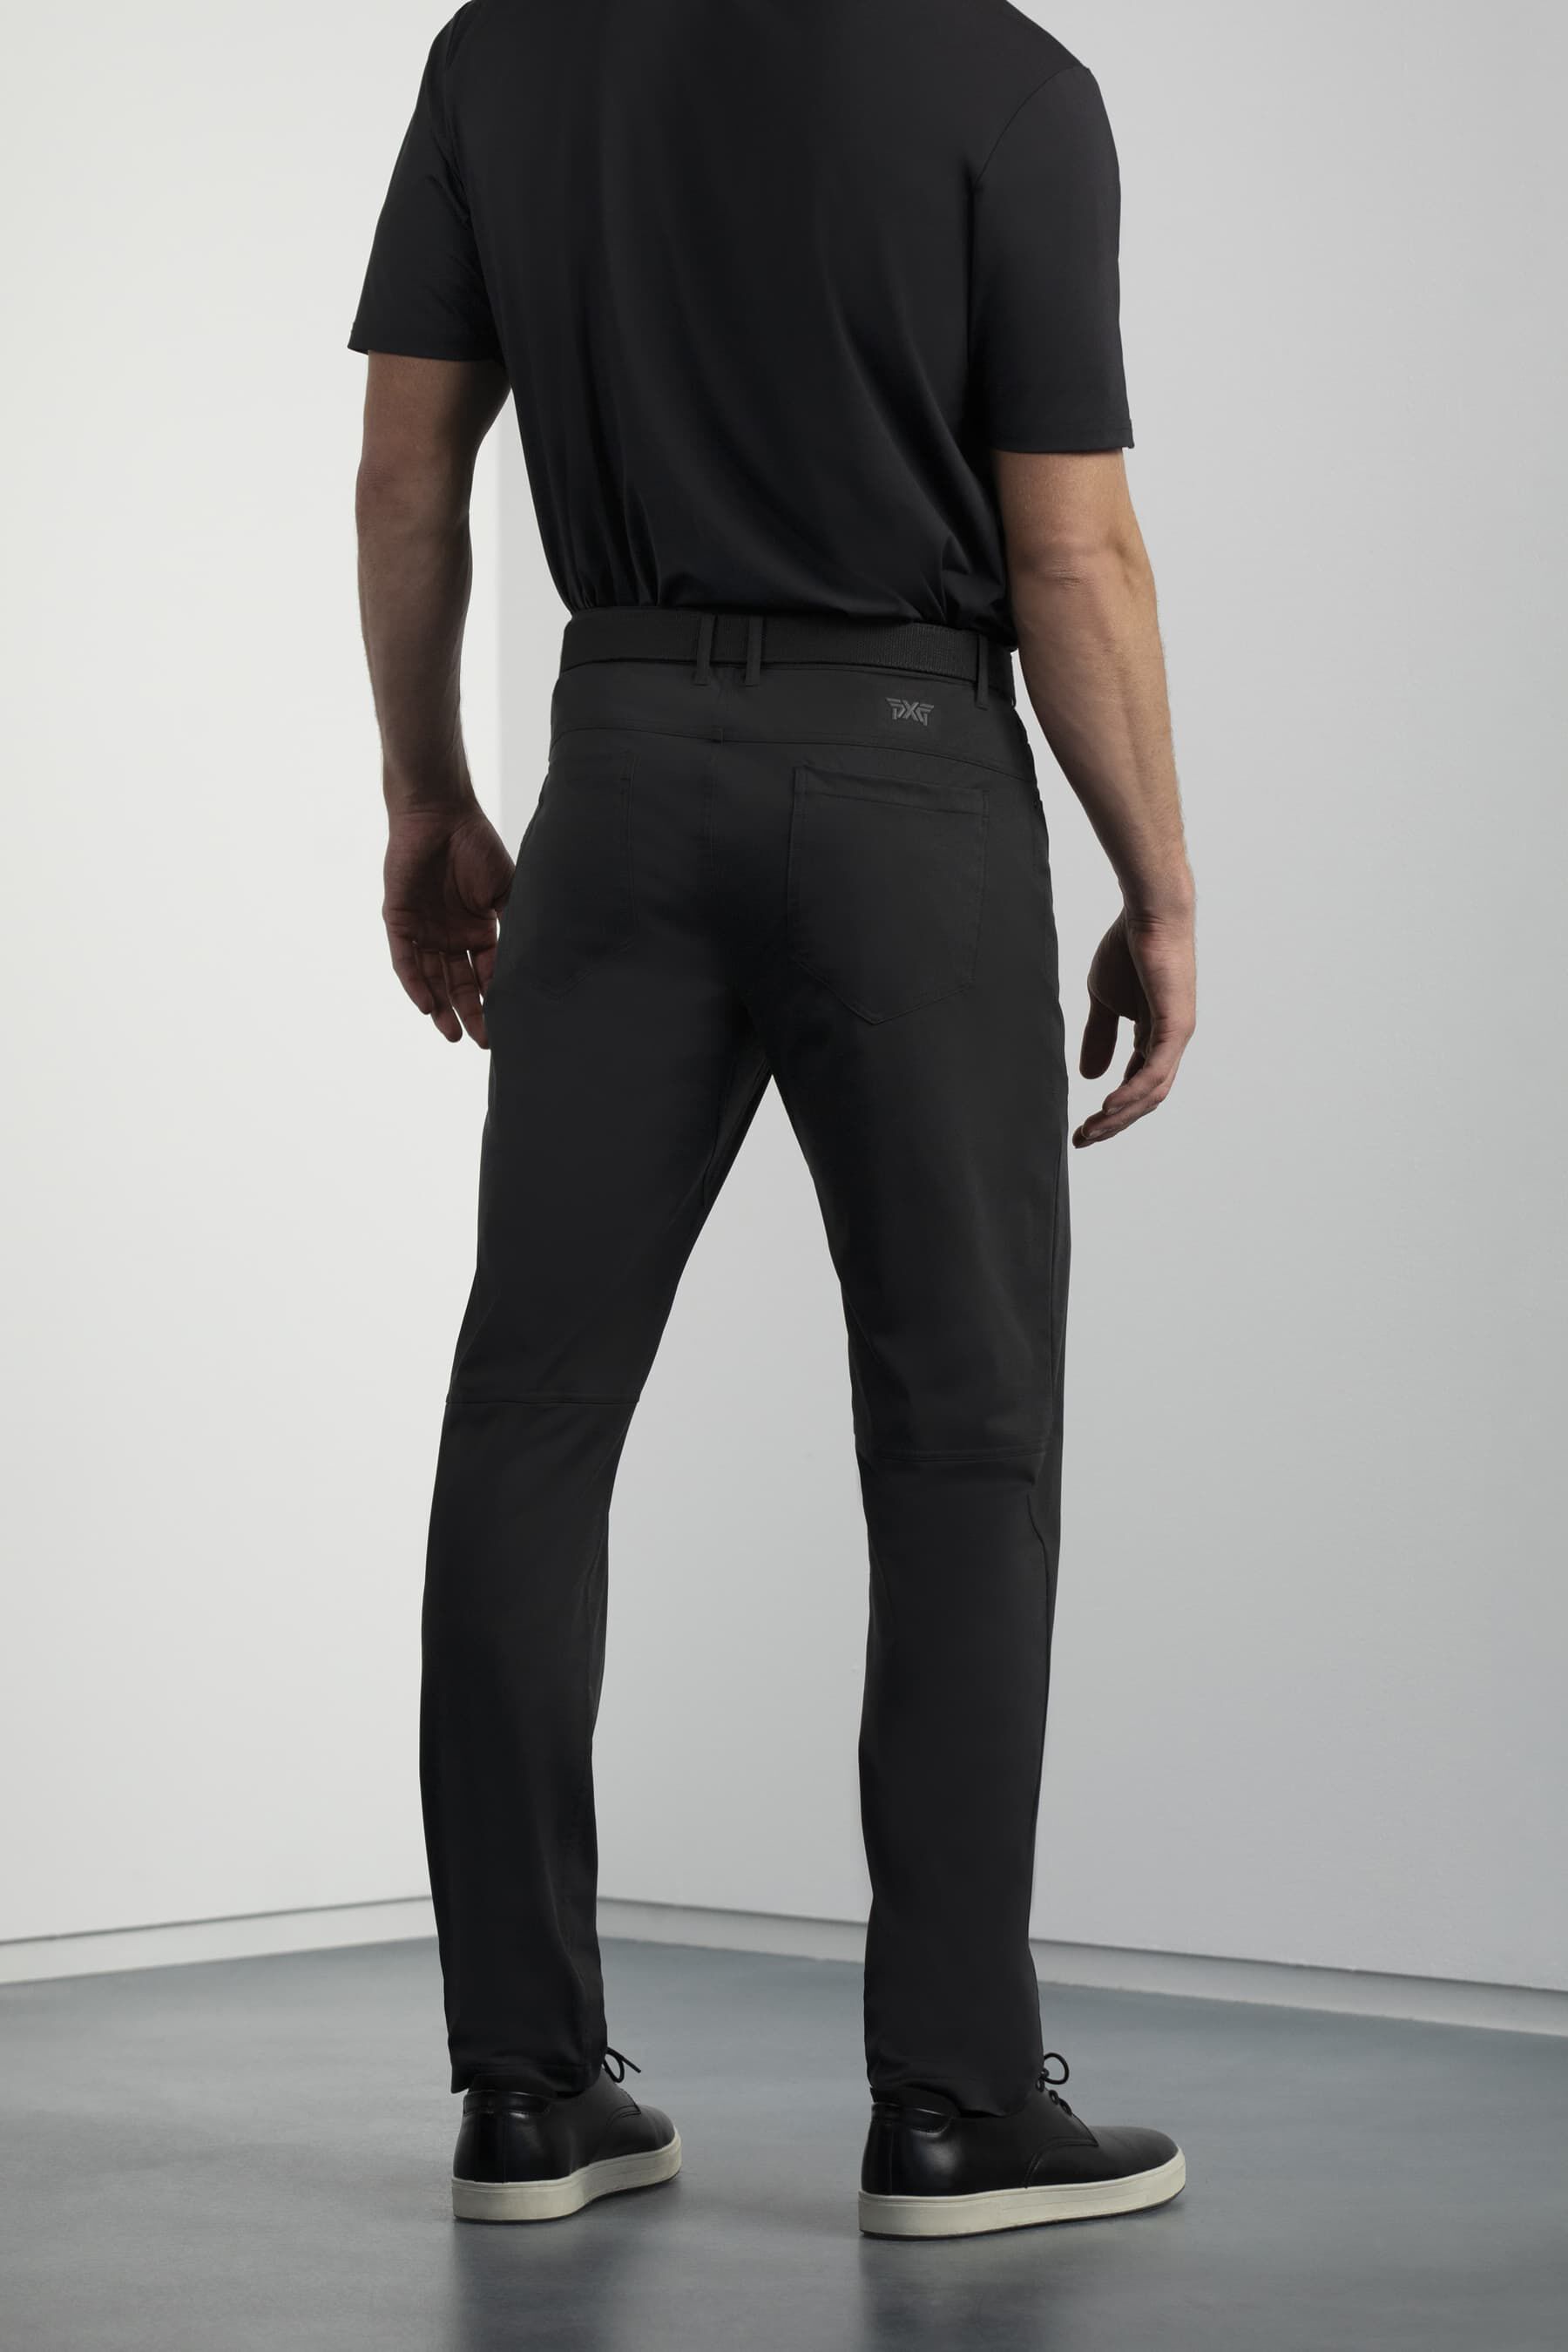 Essential Golf Pants | Men's Golf Pants and Shorts | PXG